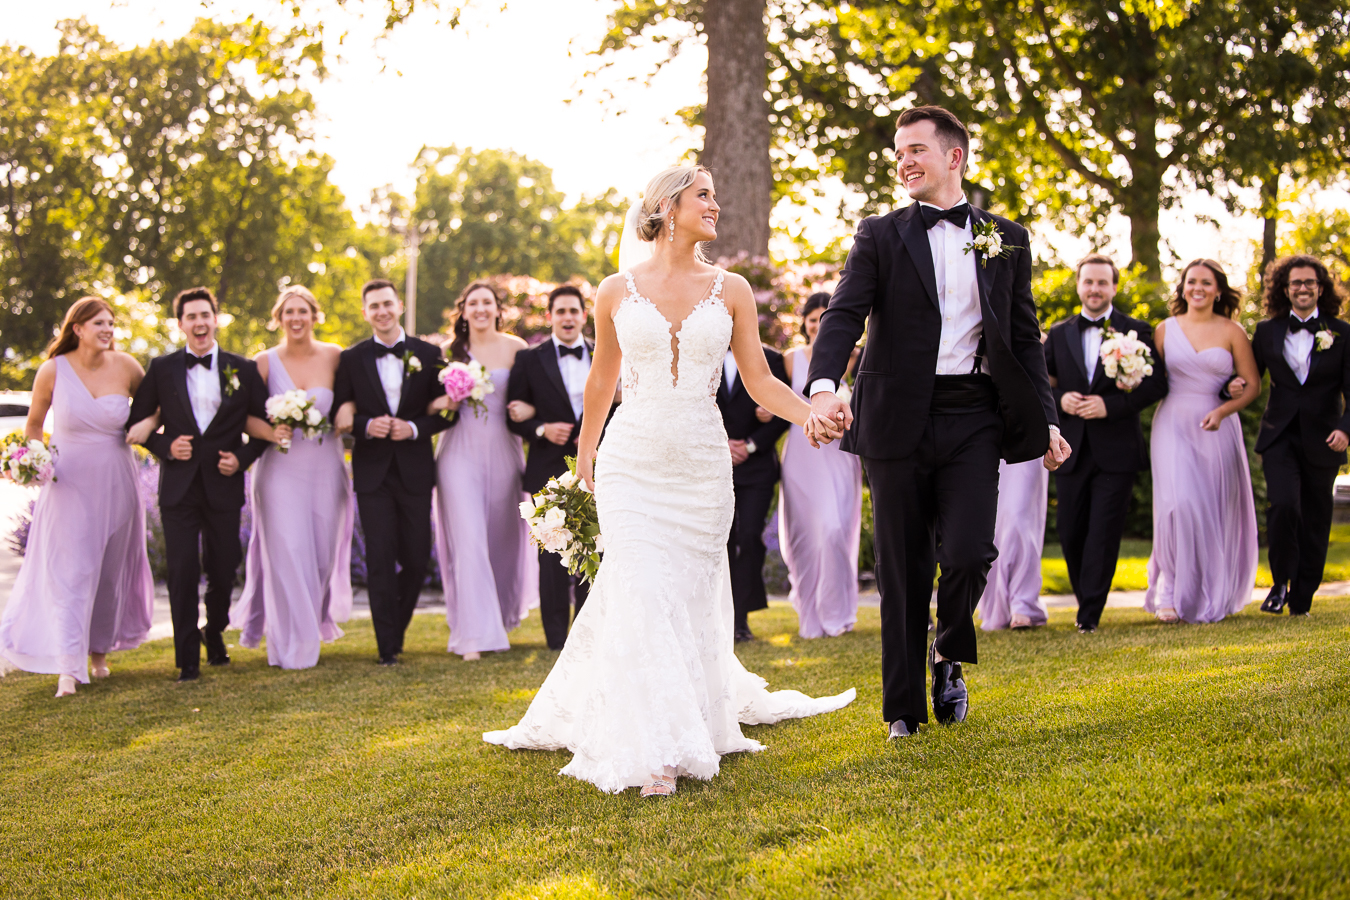 Bride and groom walking infront of their lilac dress wedding party during their wedding party portraits at their Country Club of York Wedding